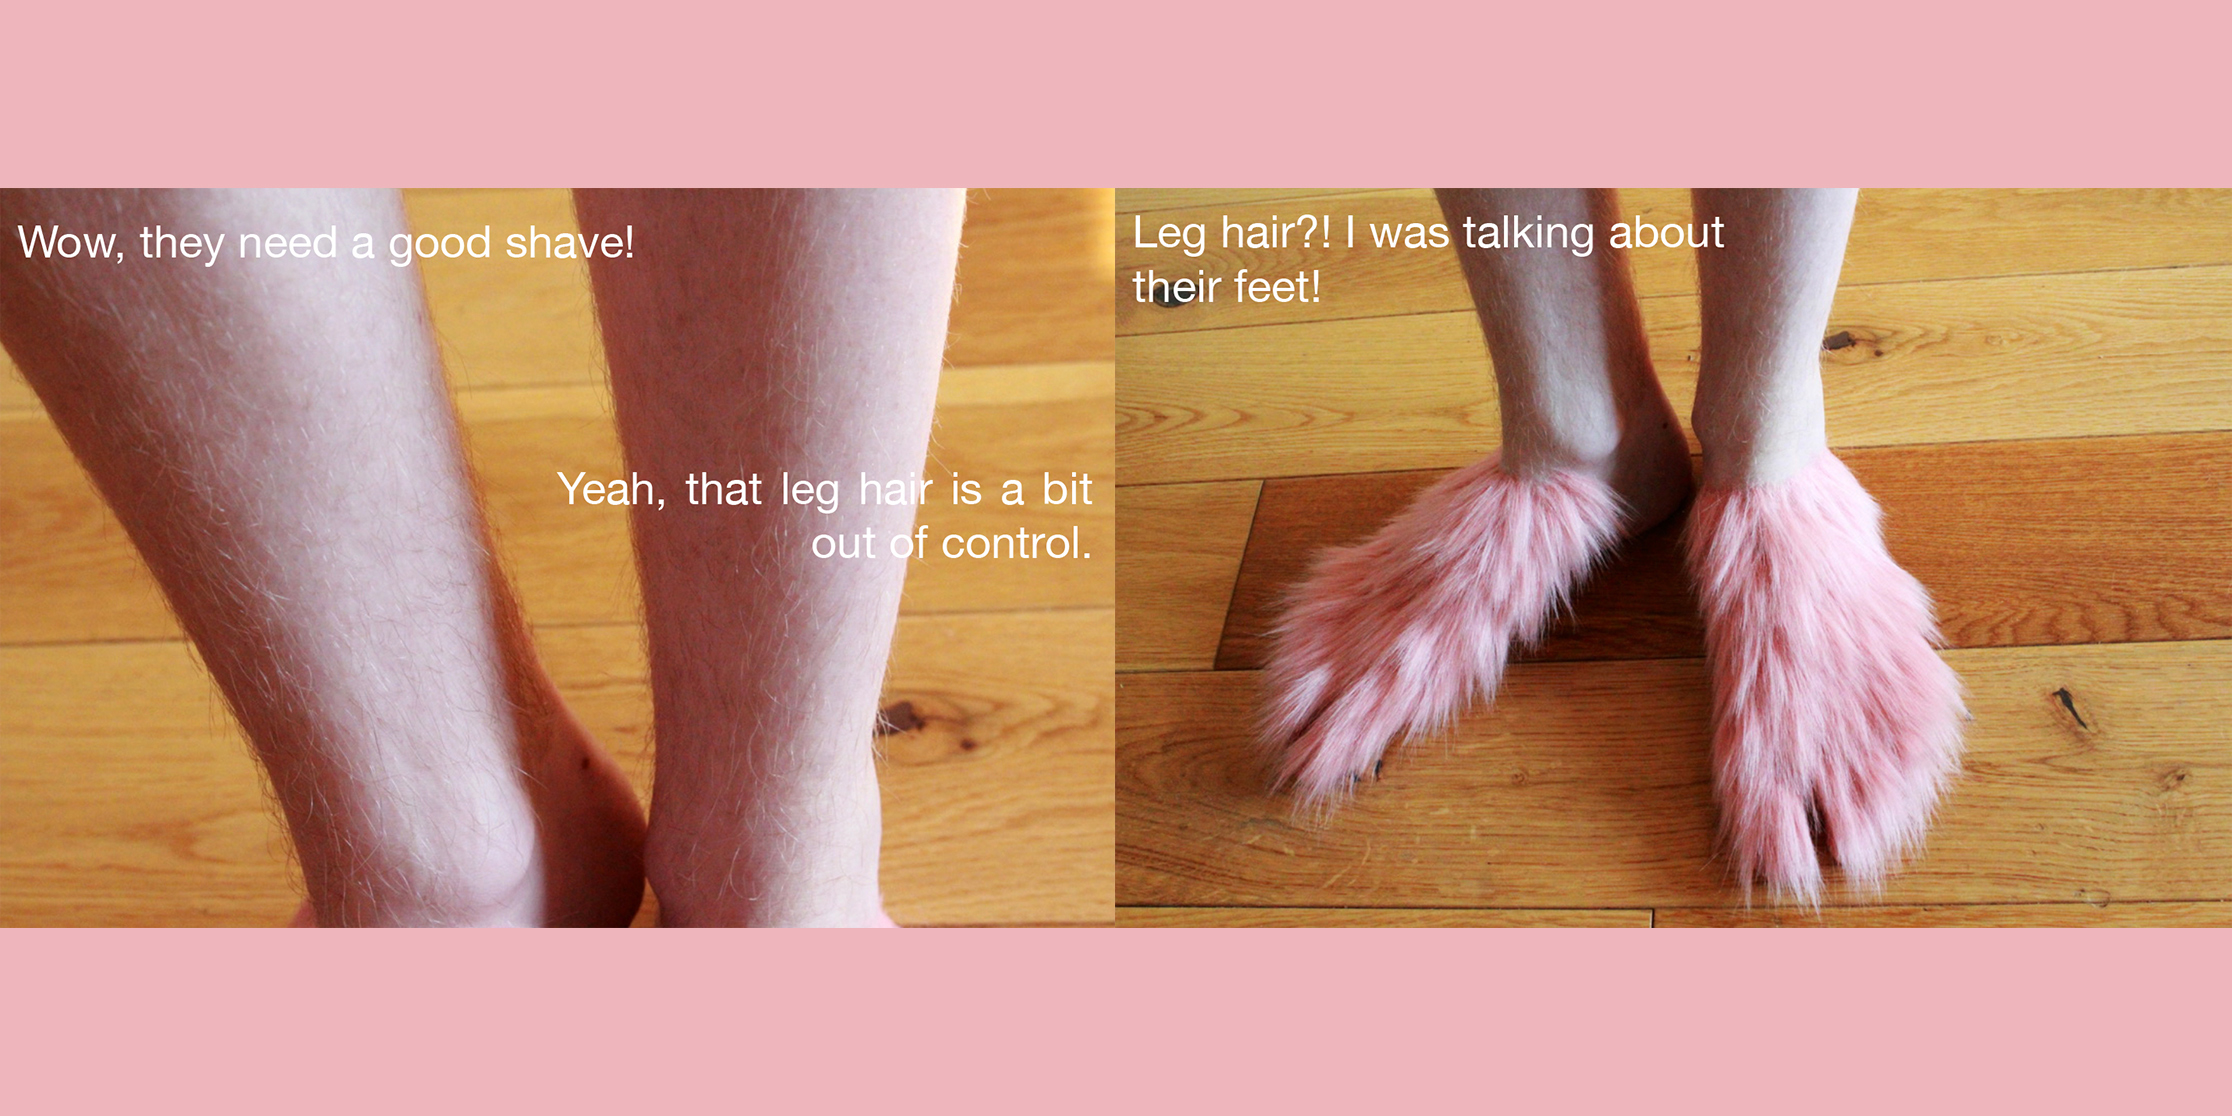 Photographs of comparing a hairy legged character and someone with fake fur feet